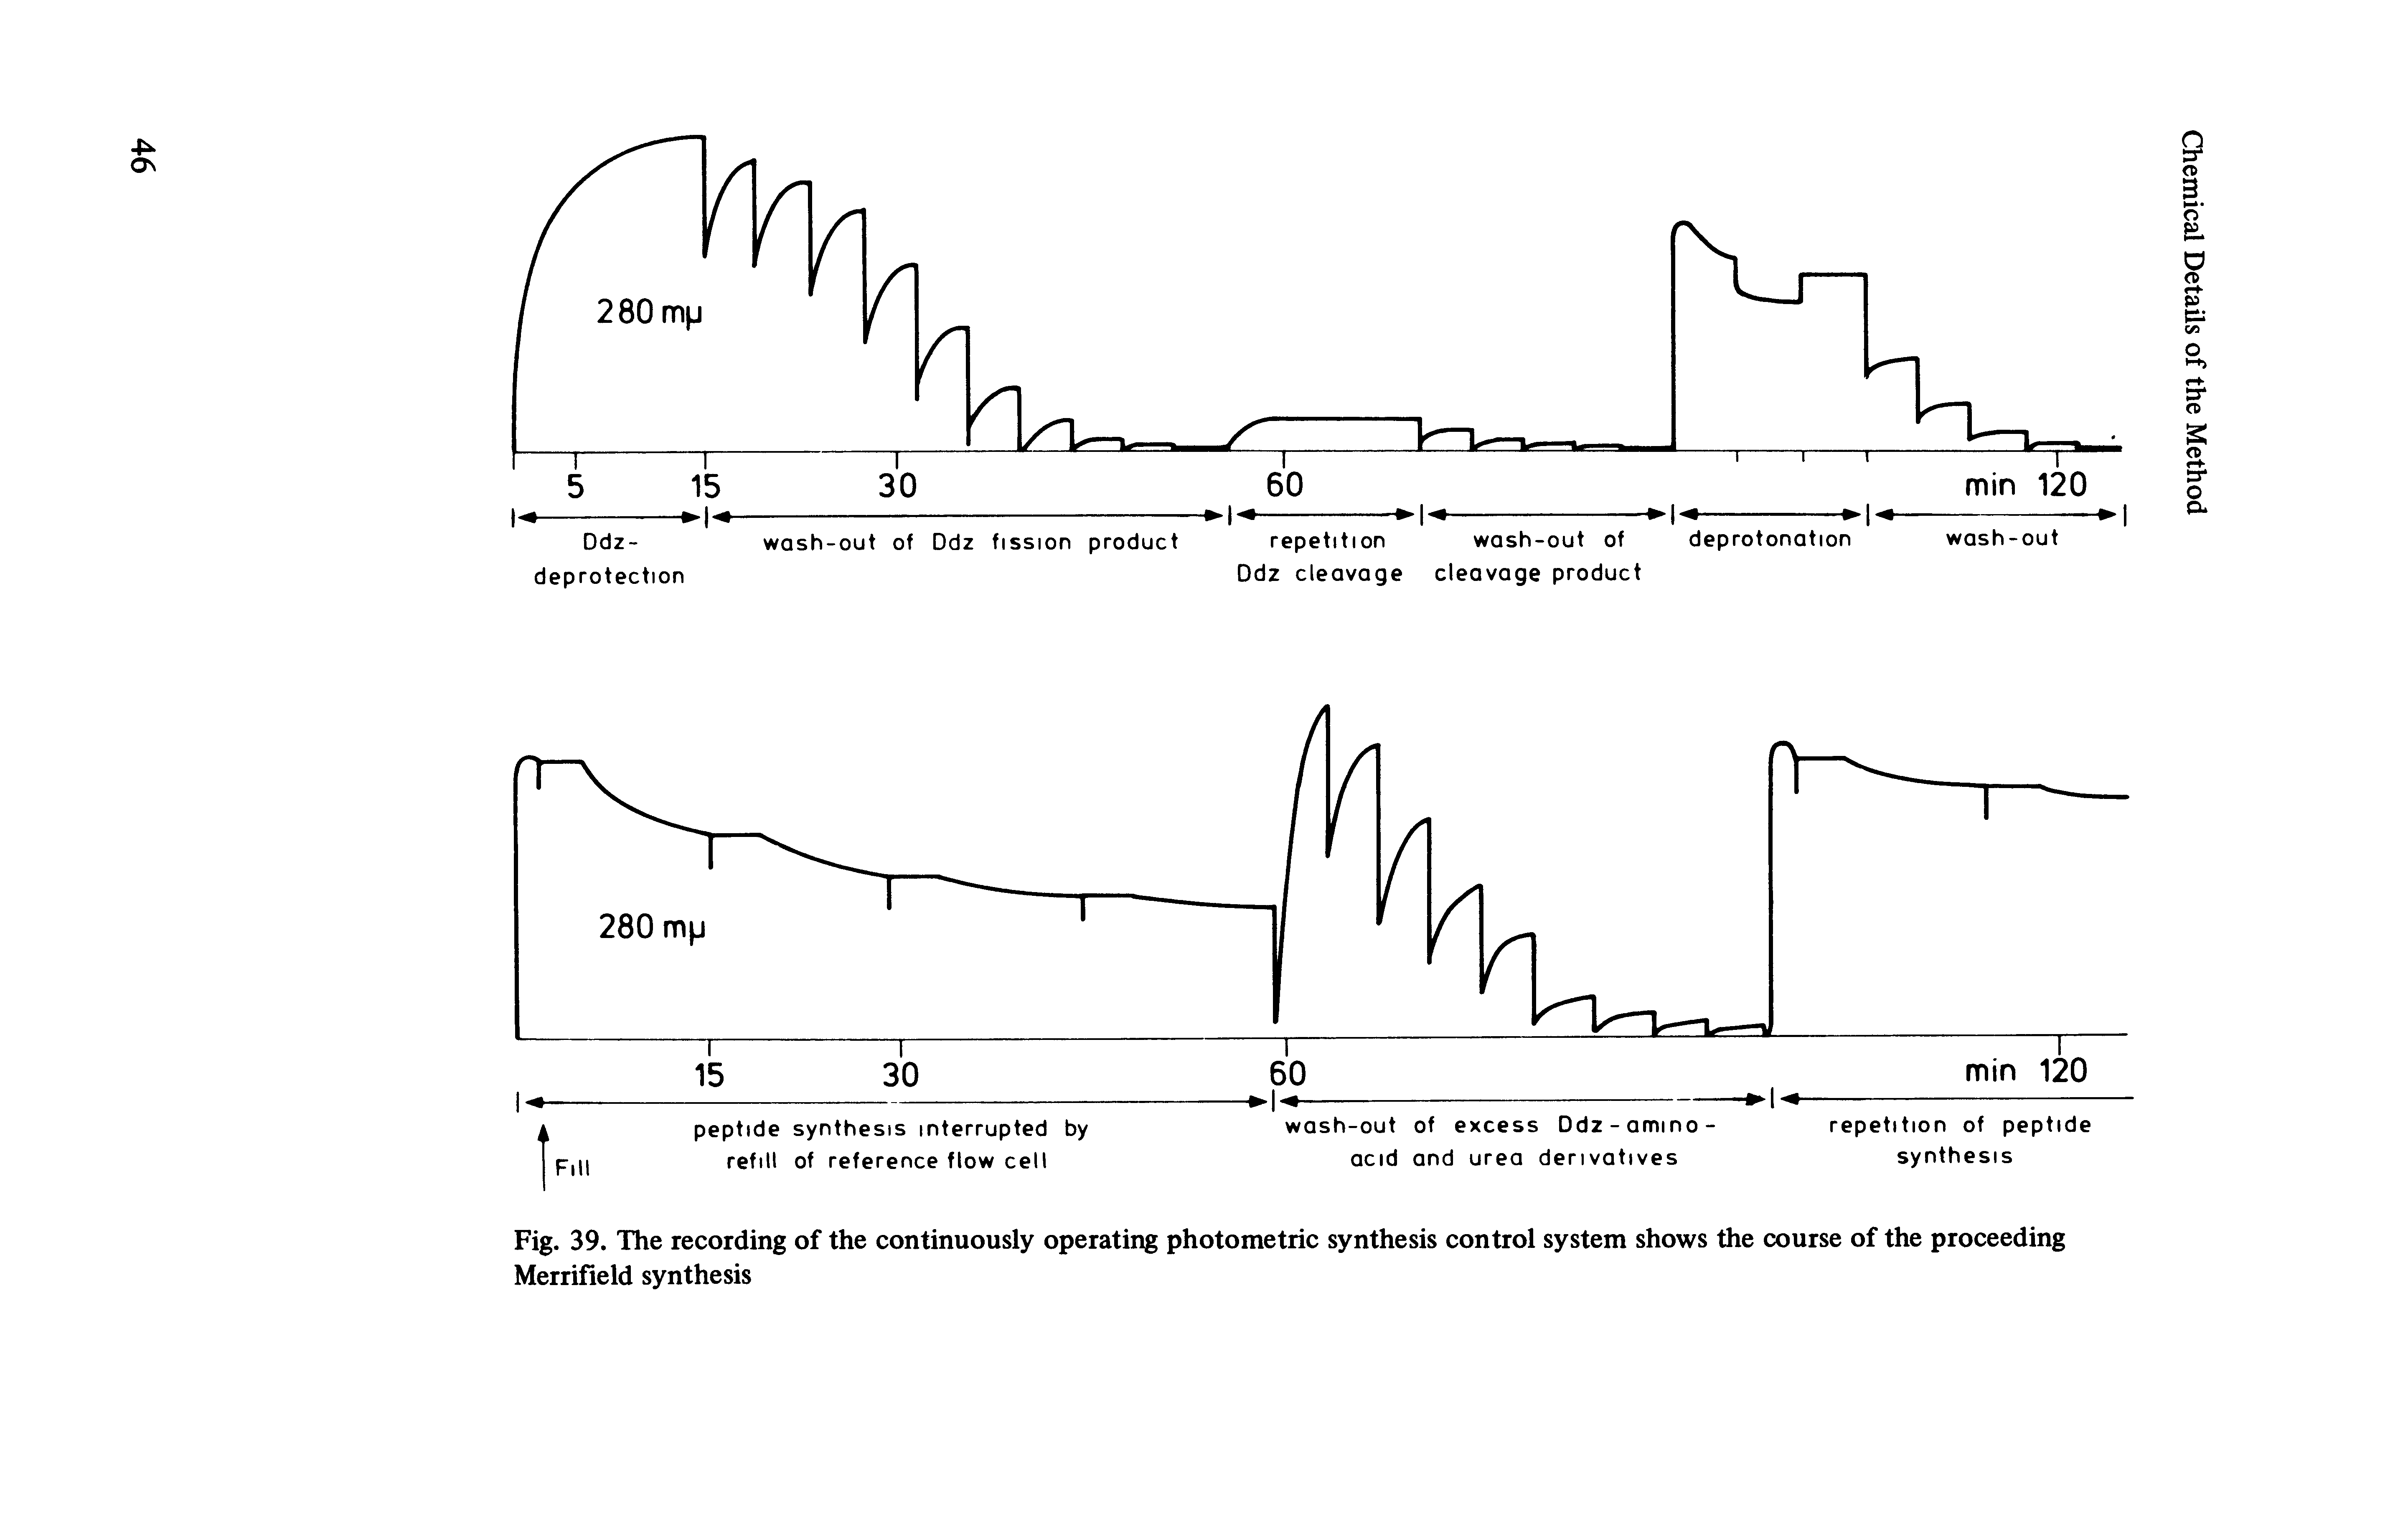 Fig. 39. The recording of the continuously operating photometric synthesis control system shows the course of the proceeding Merrifield synthesis...